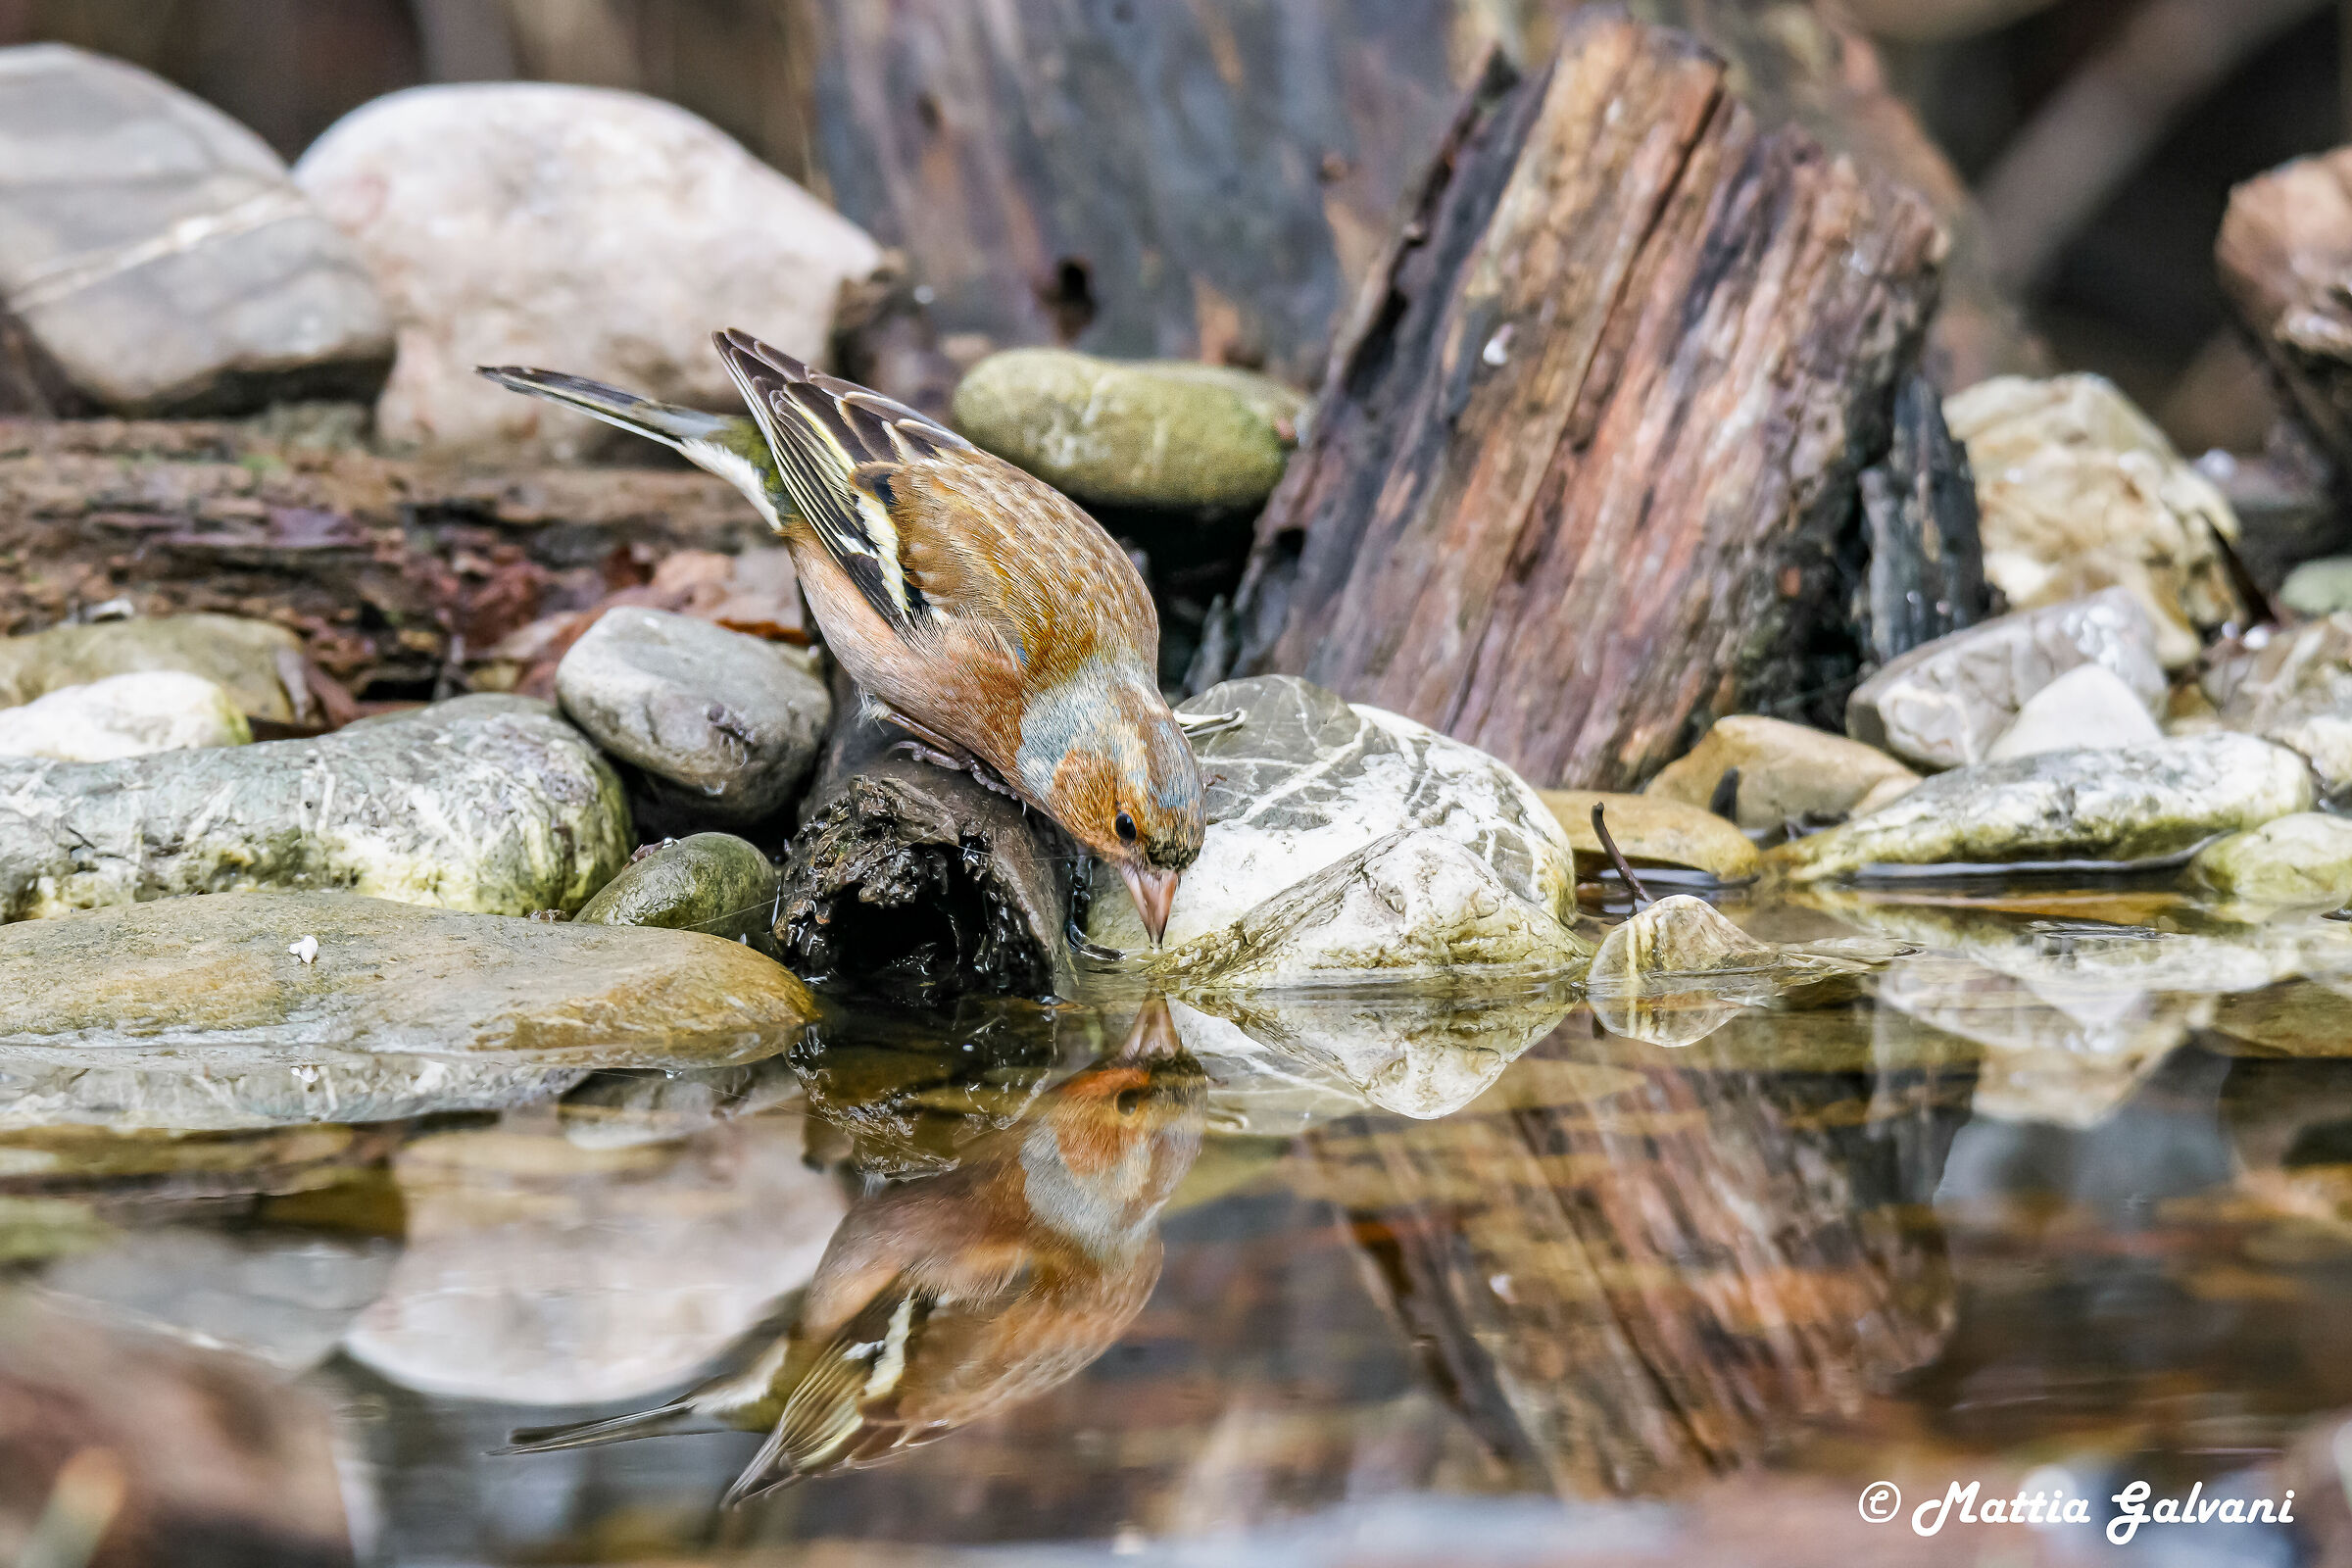 Male chaffinch with a lot of thirst...